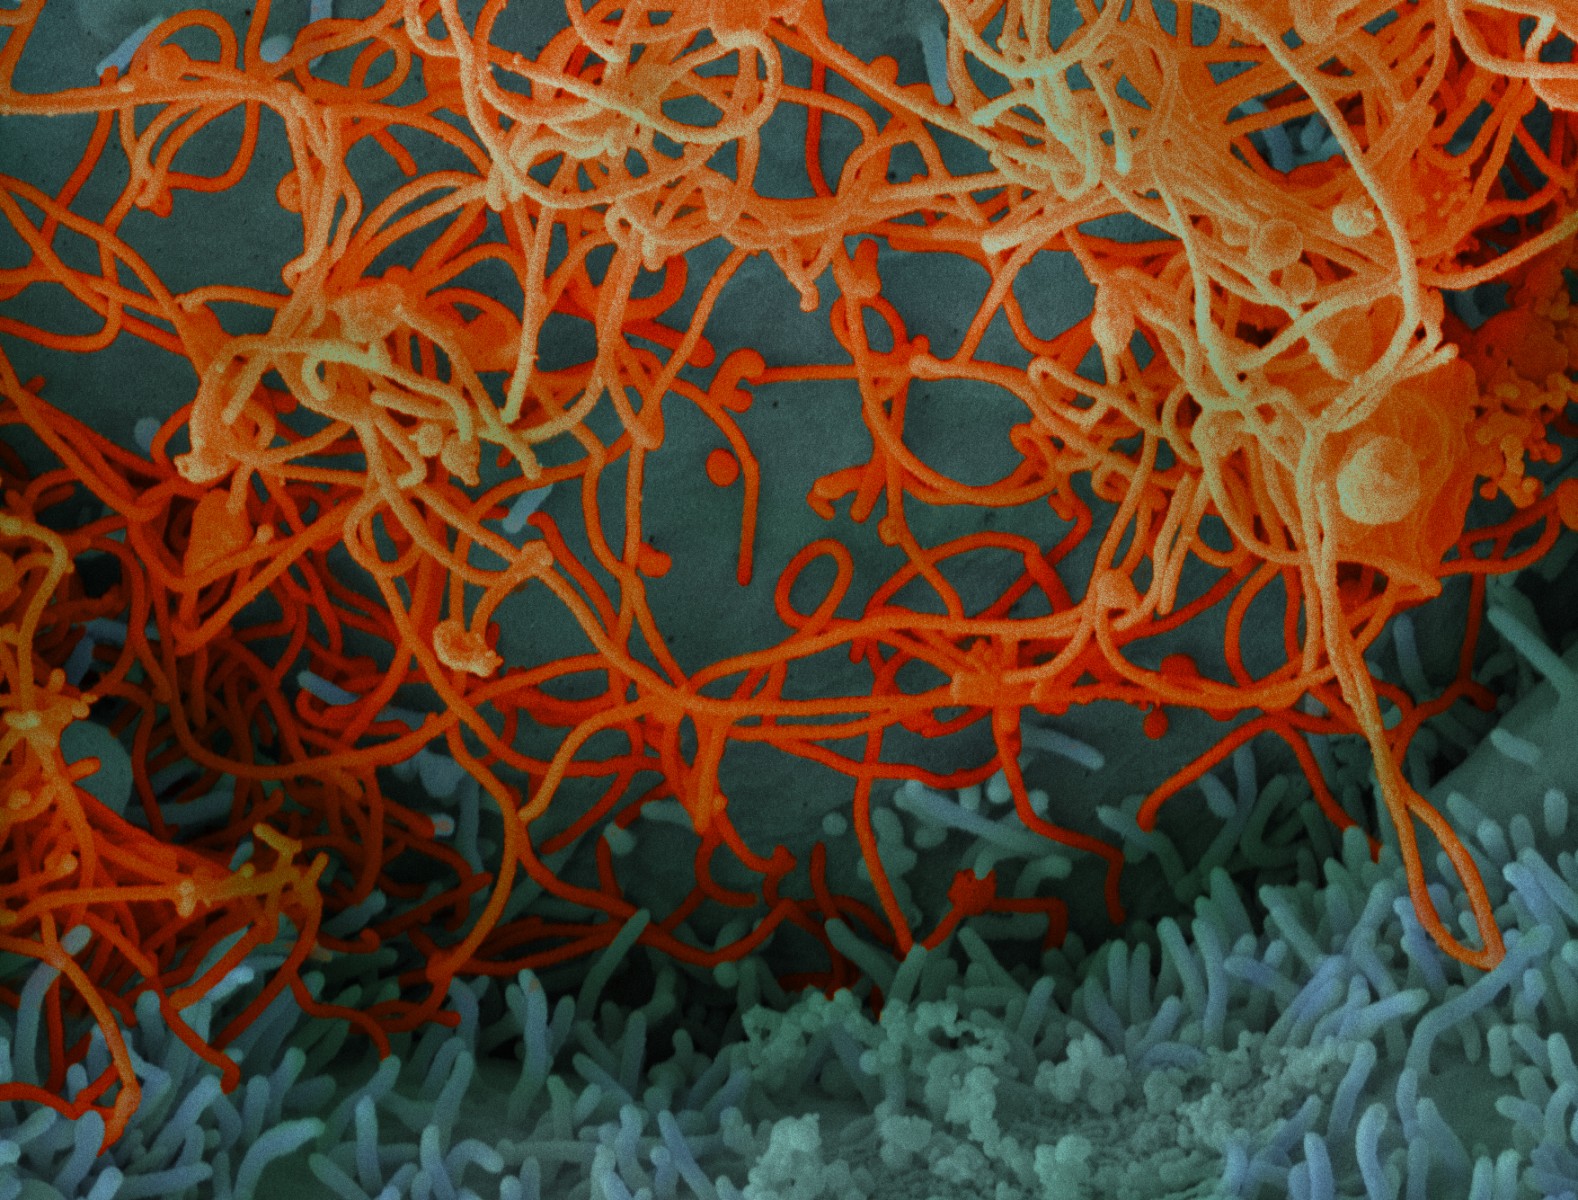 “Repeat offender” virus families that may pose higher risk to humans include filoviruses like Ebola, seen in this image of the virus isolated from patient blood samples in Mali. Image: National Institute of Allergy and Infectious Diseases